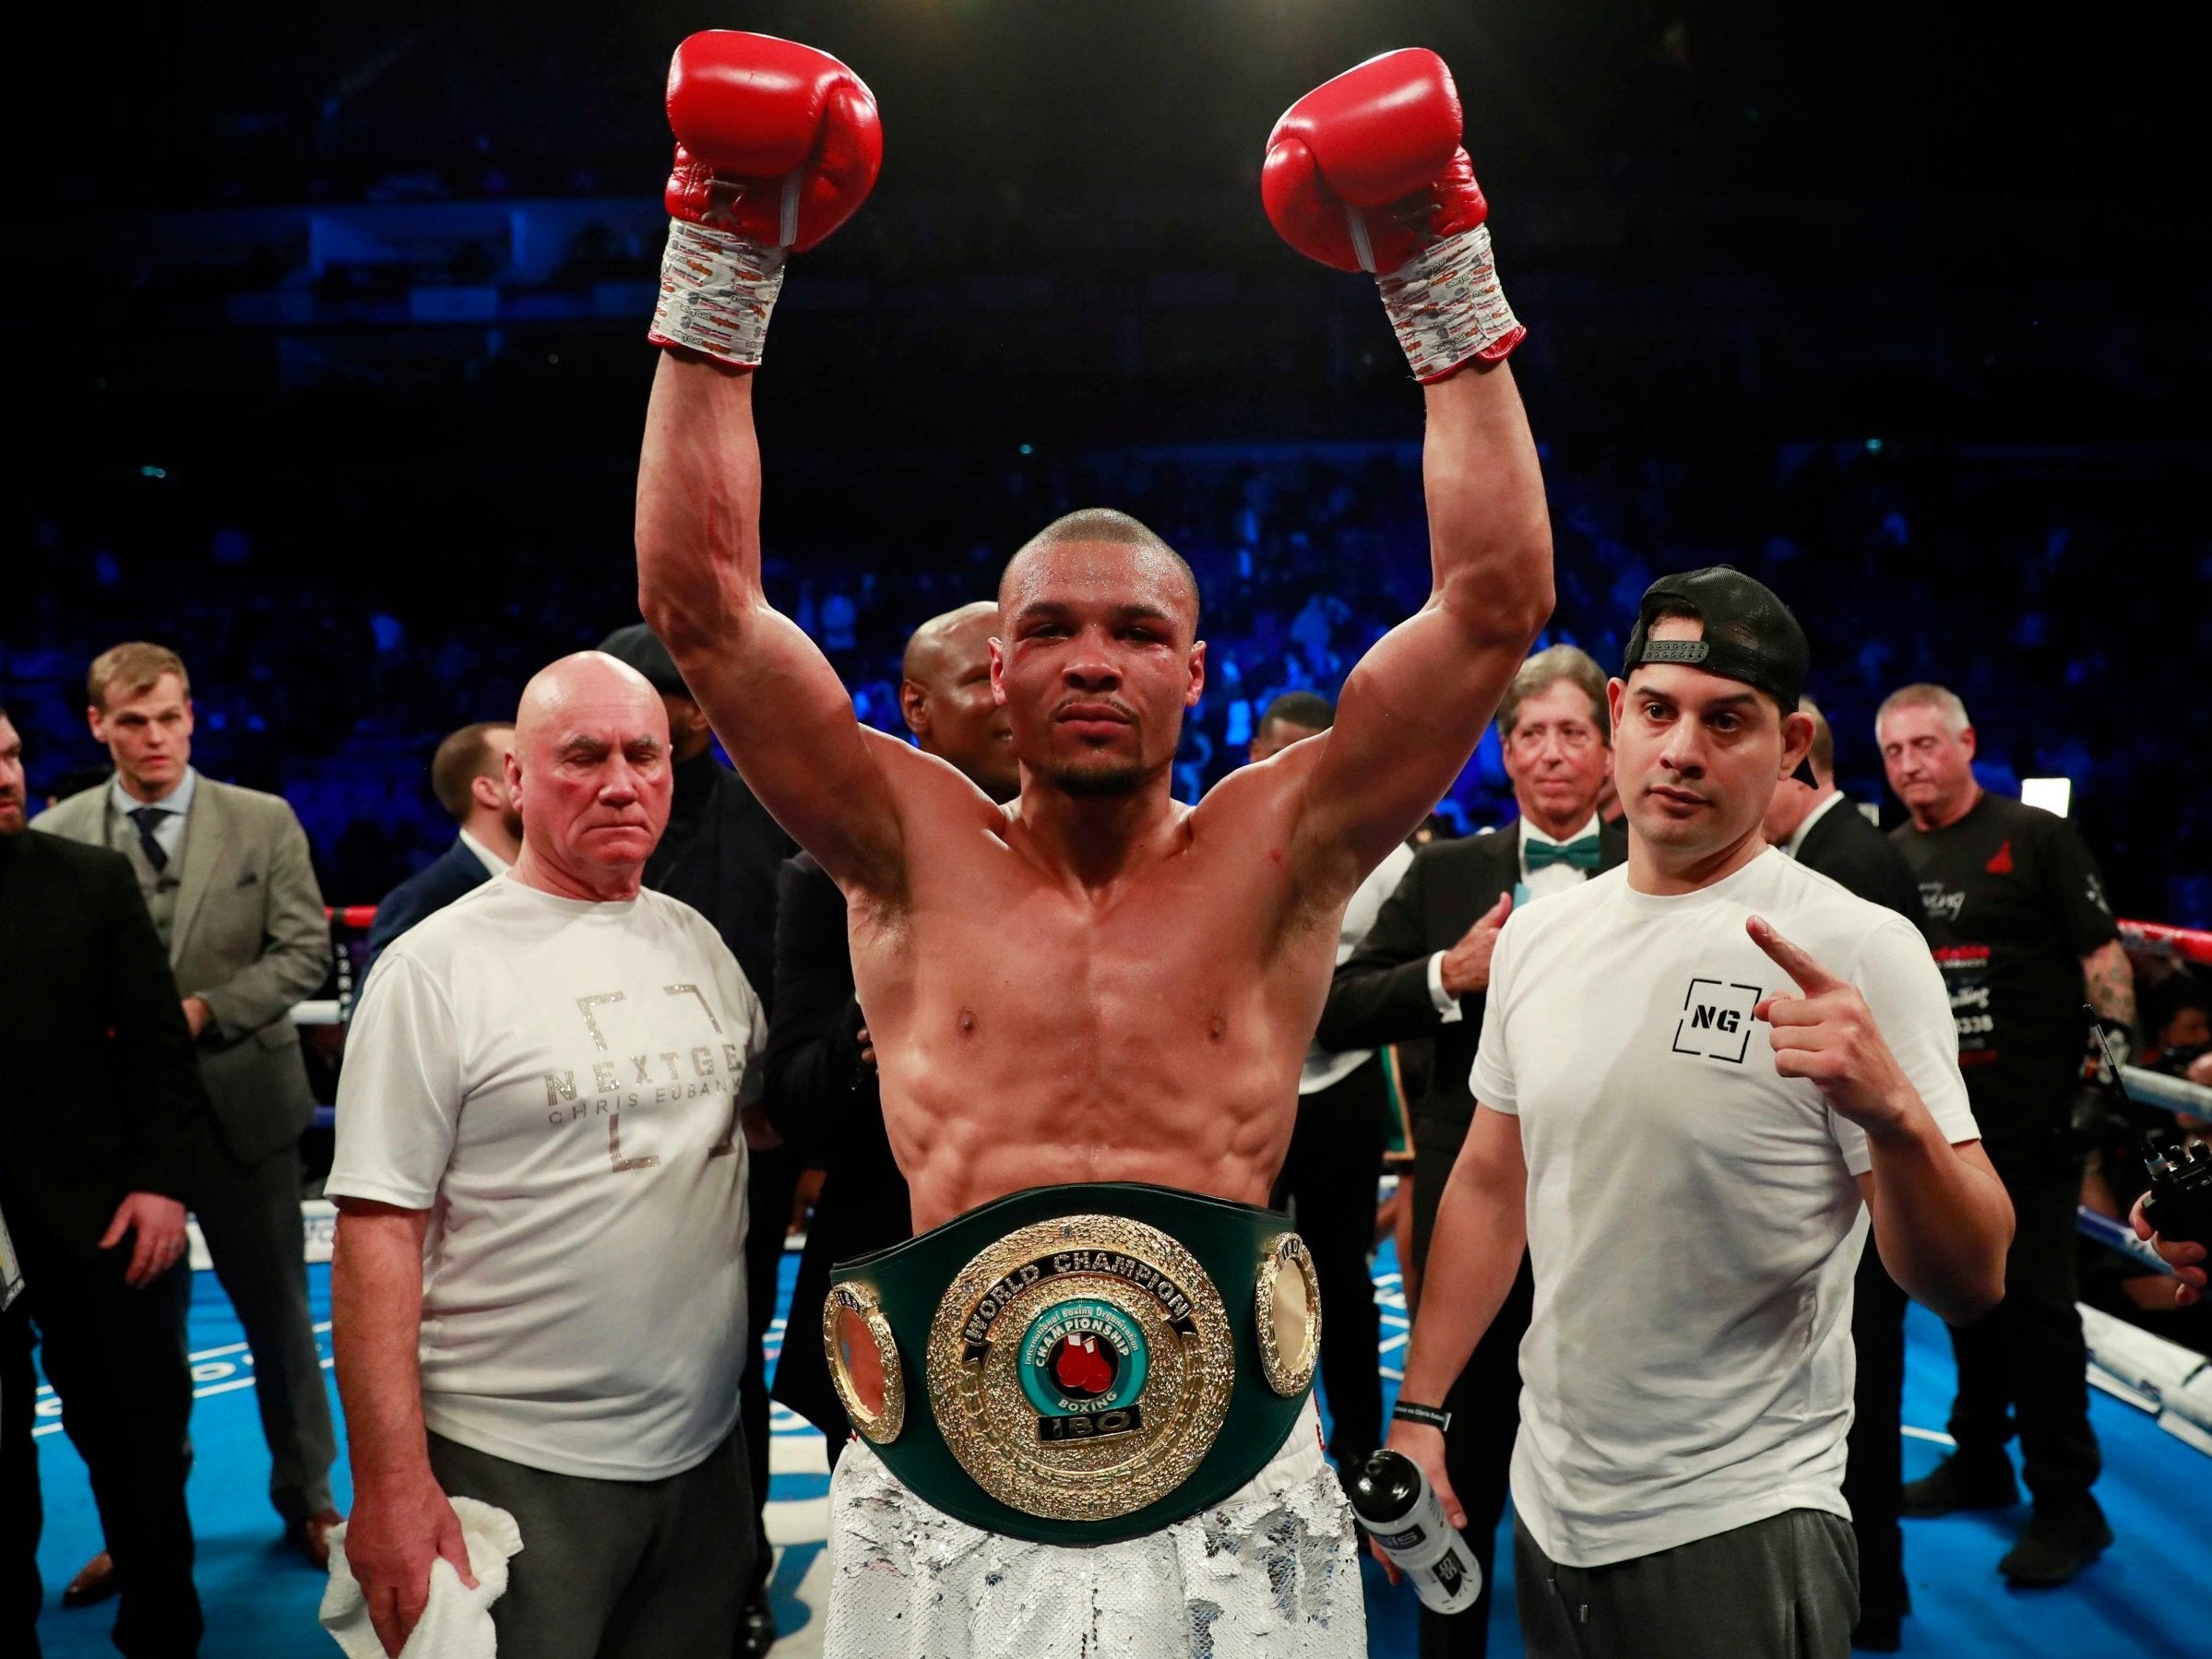 Eubank defeated DeGale by unanimous decision